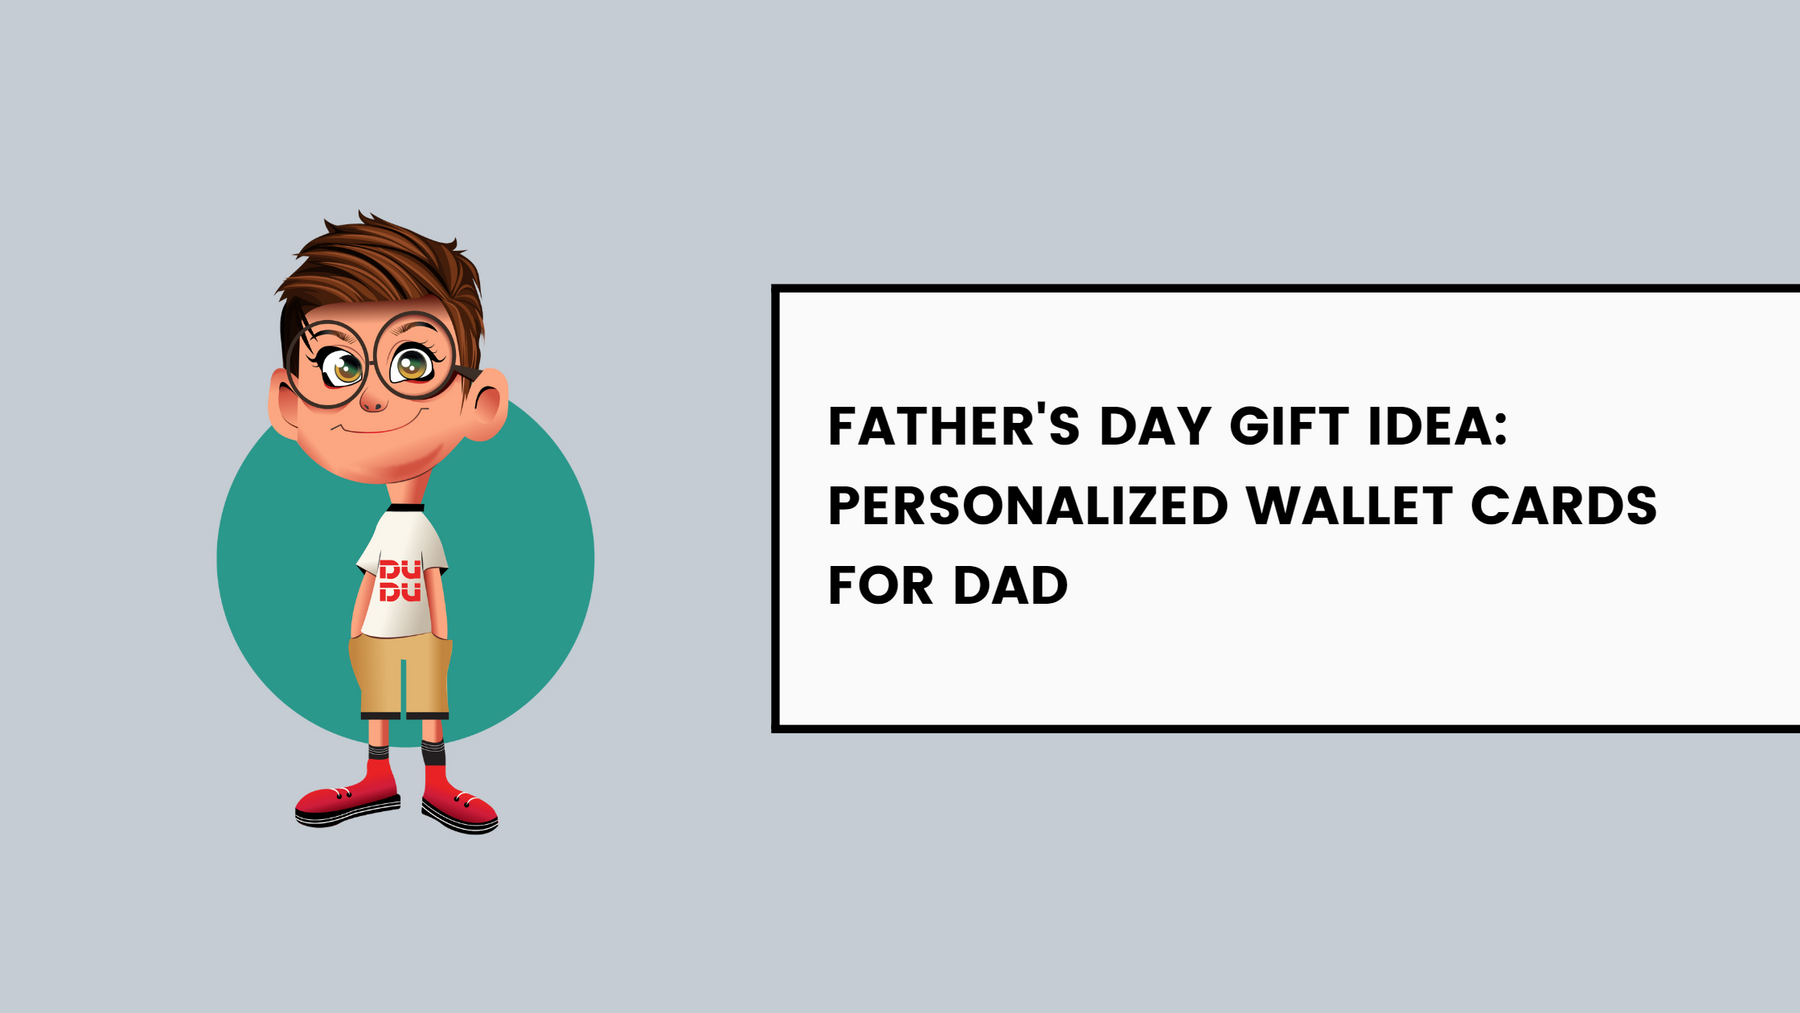 Father's Day Gift Idea: Personalized Wallet Cards For Dad